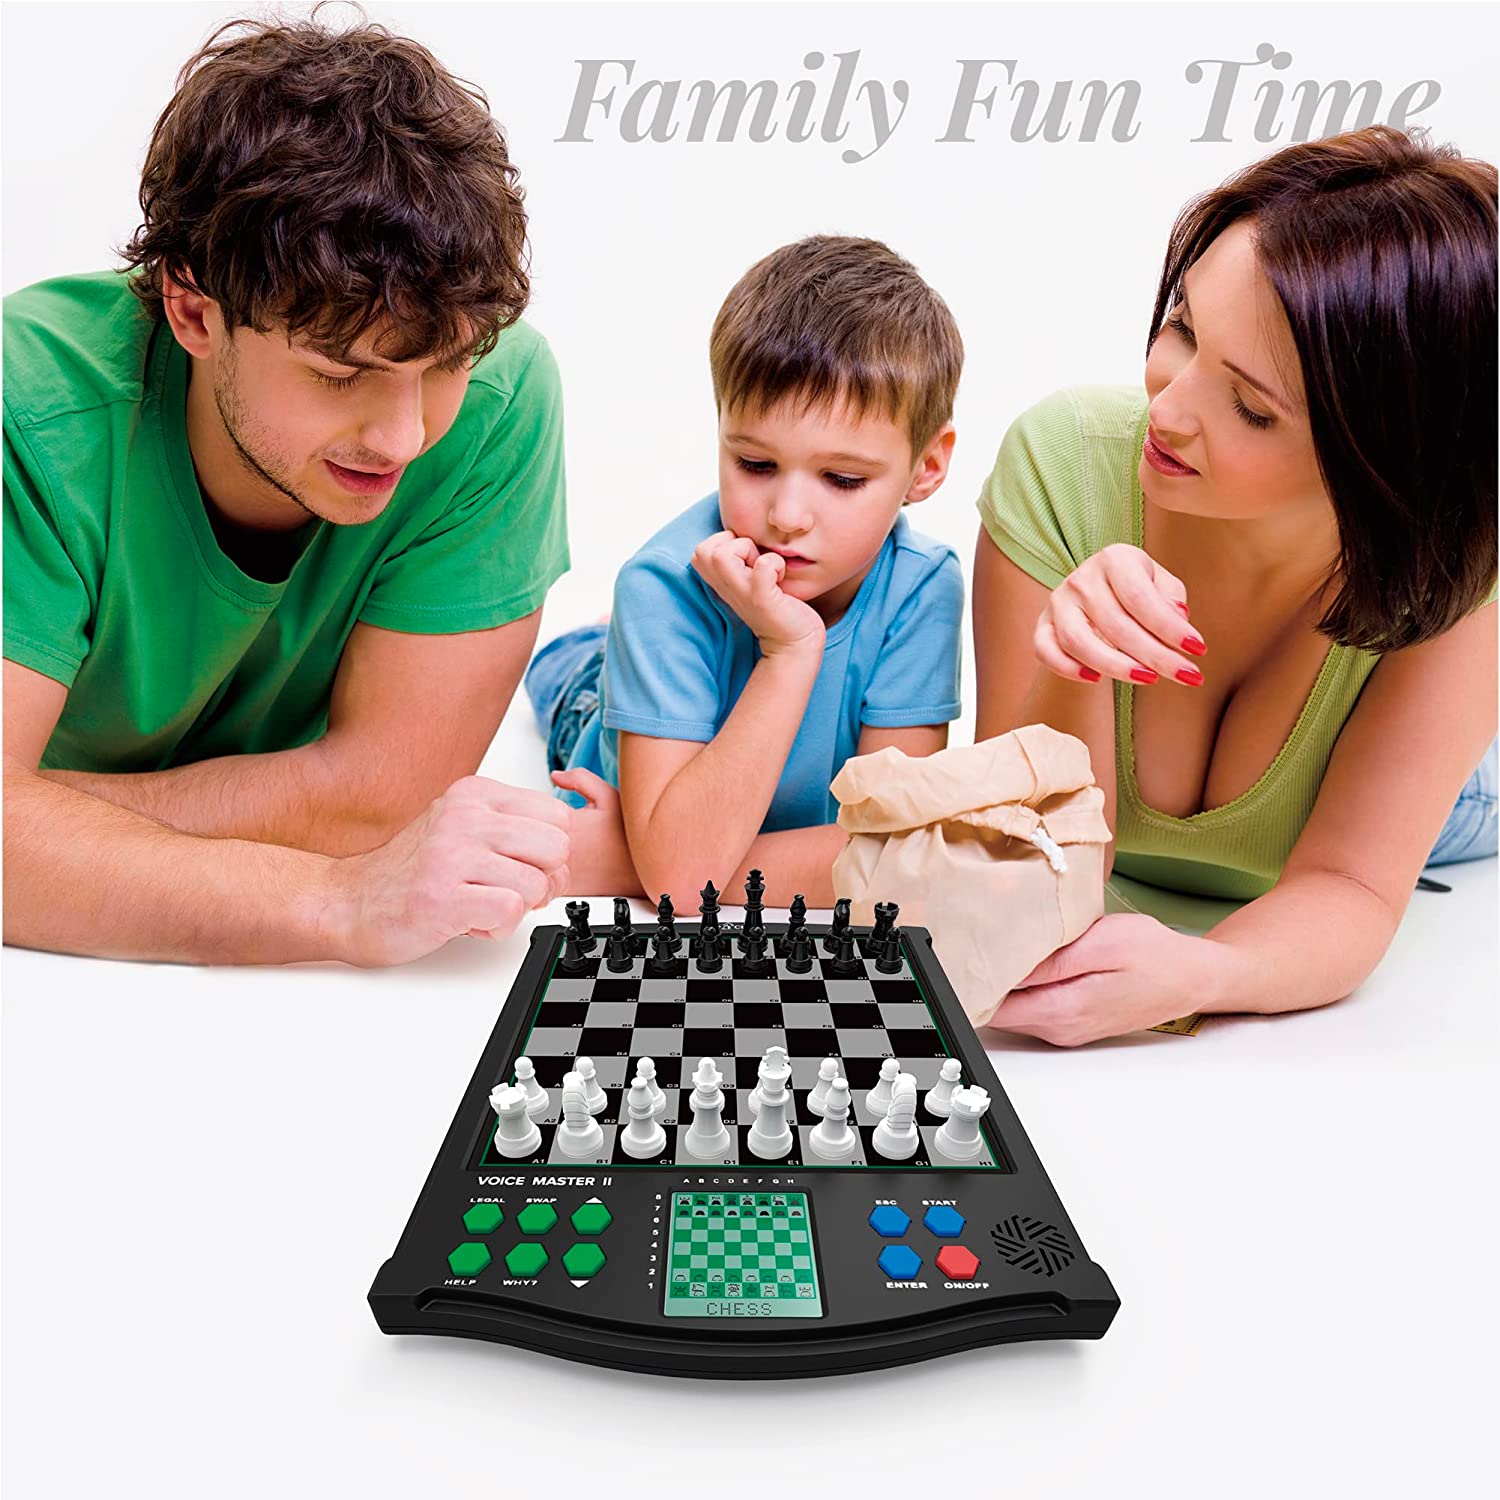 TOP 1 CHESS Classic Voice Master Electronic Chess Set